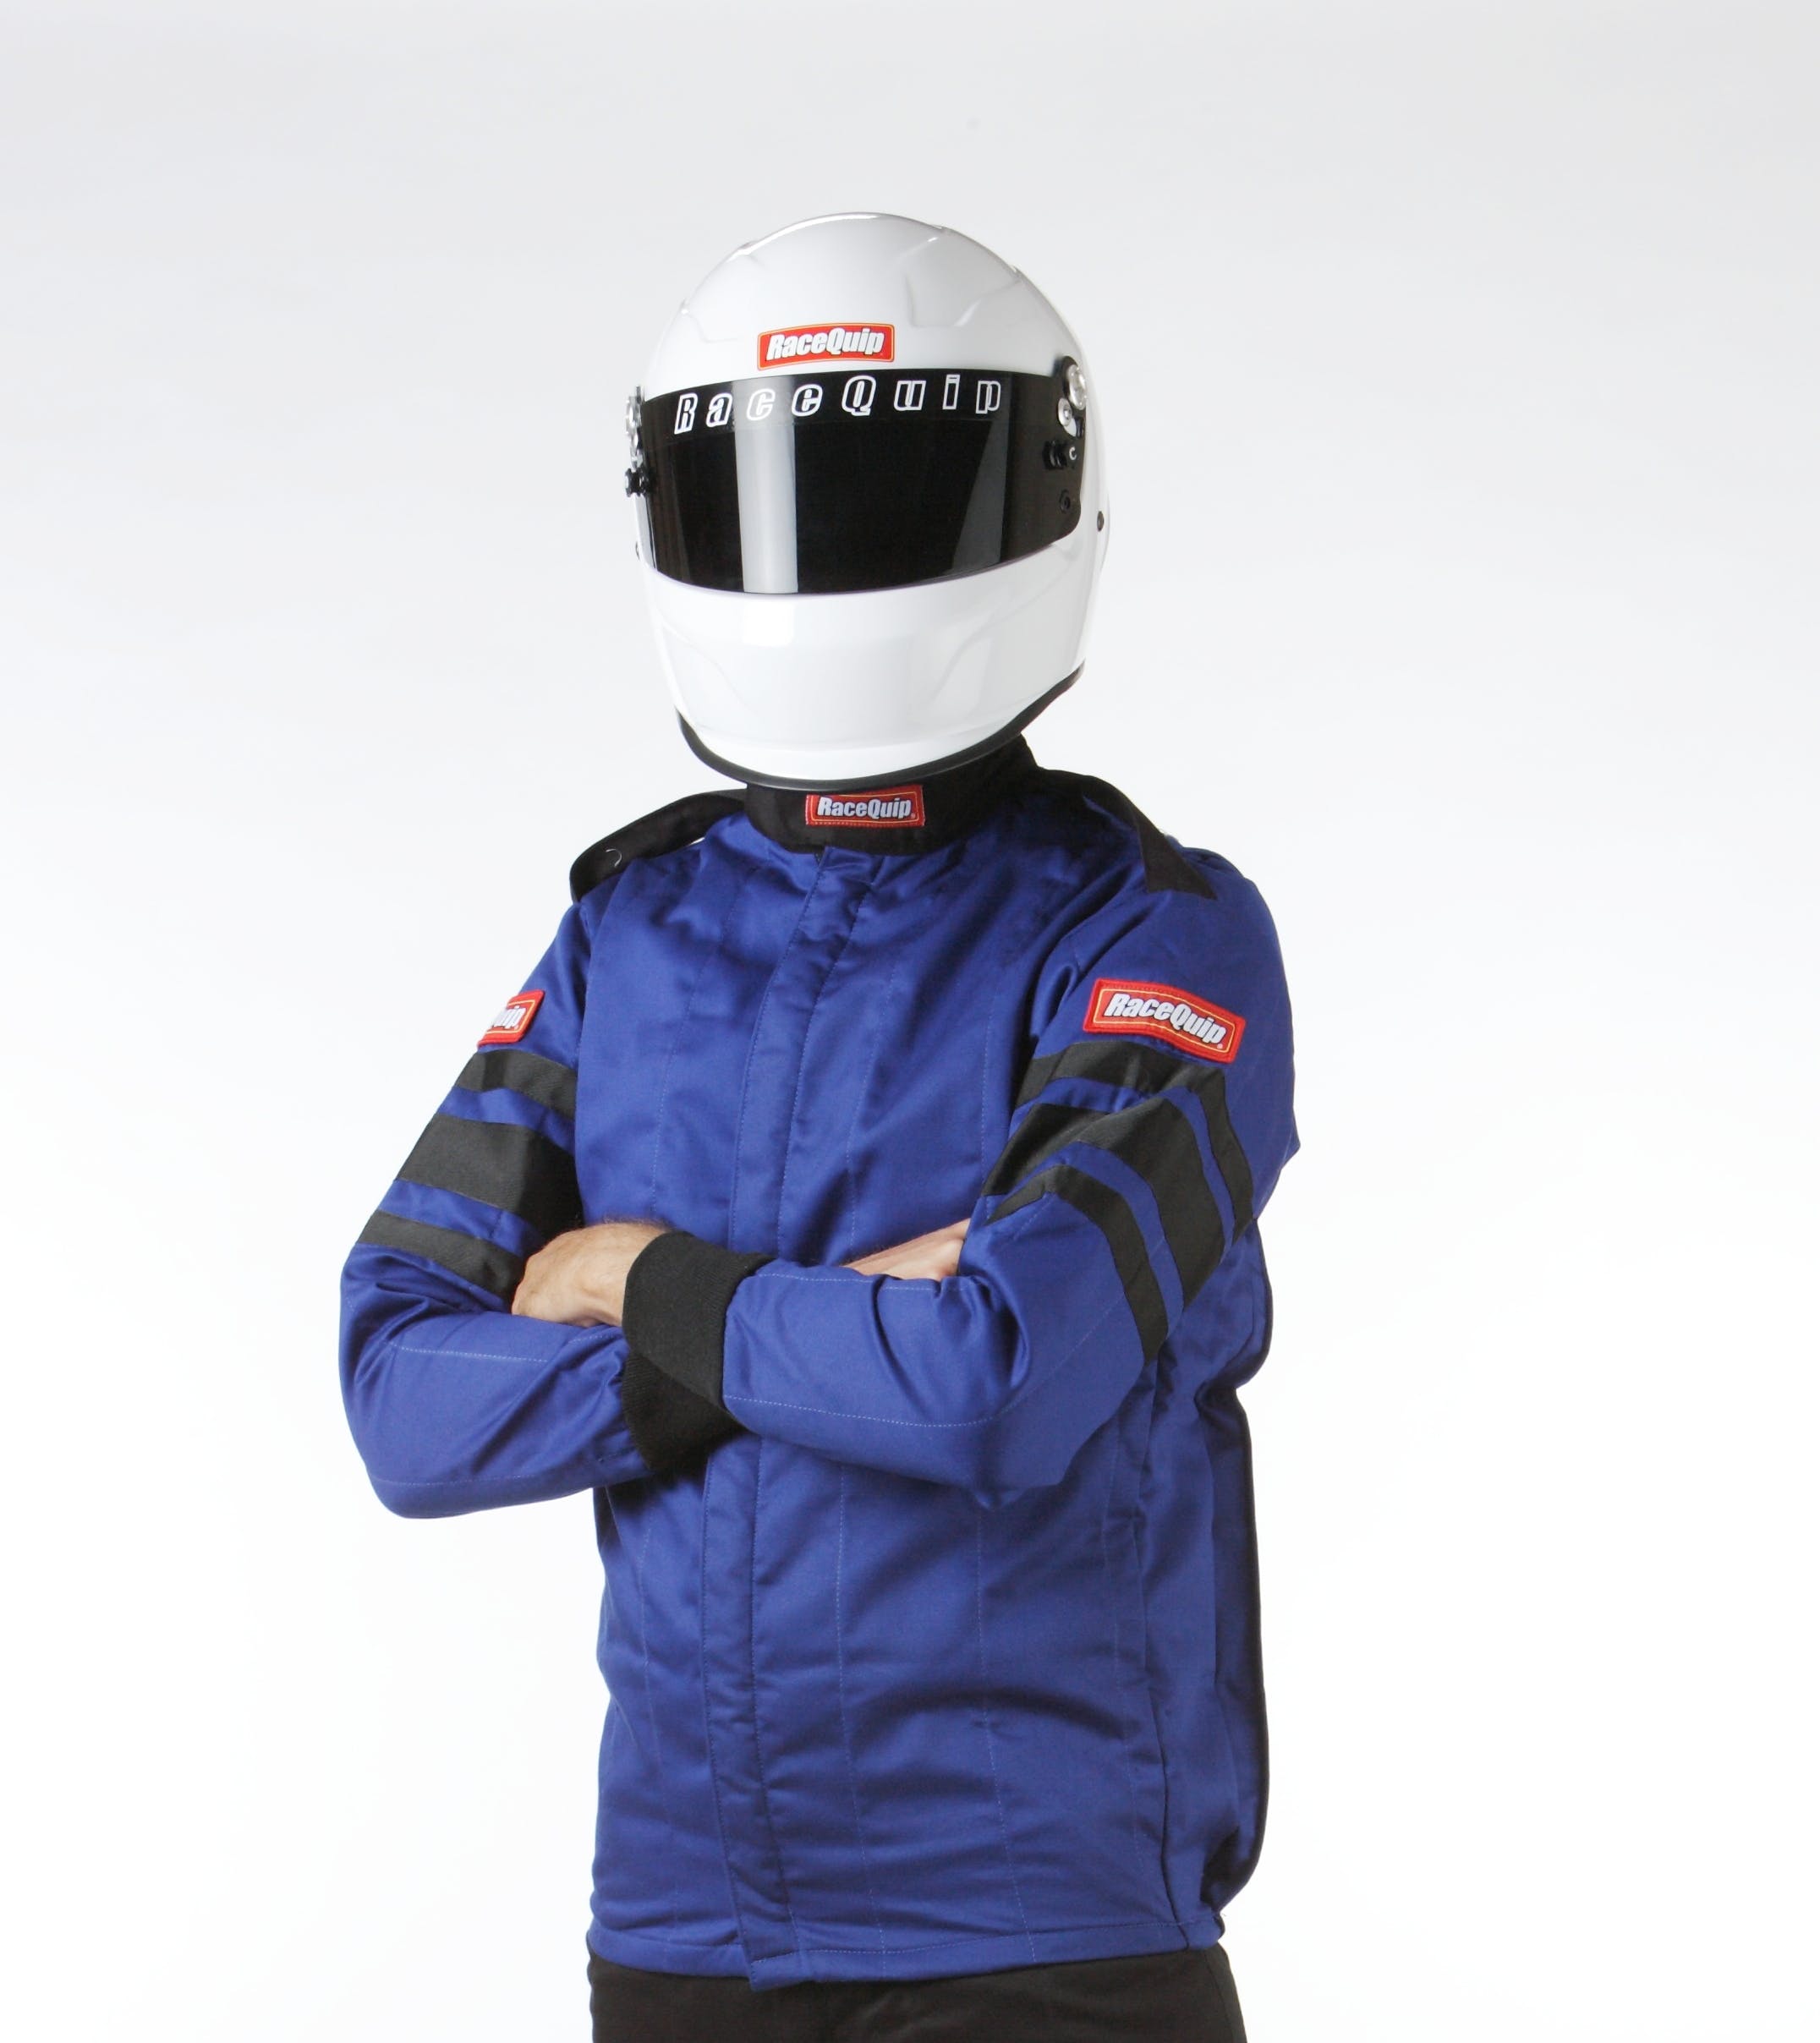 RaceQuip 121028 SFI-5 Pyrovatex Multi-Layer Racing Fire Jacket (Blue, 3X-Large)